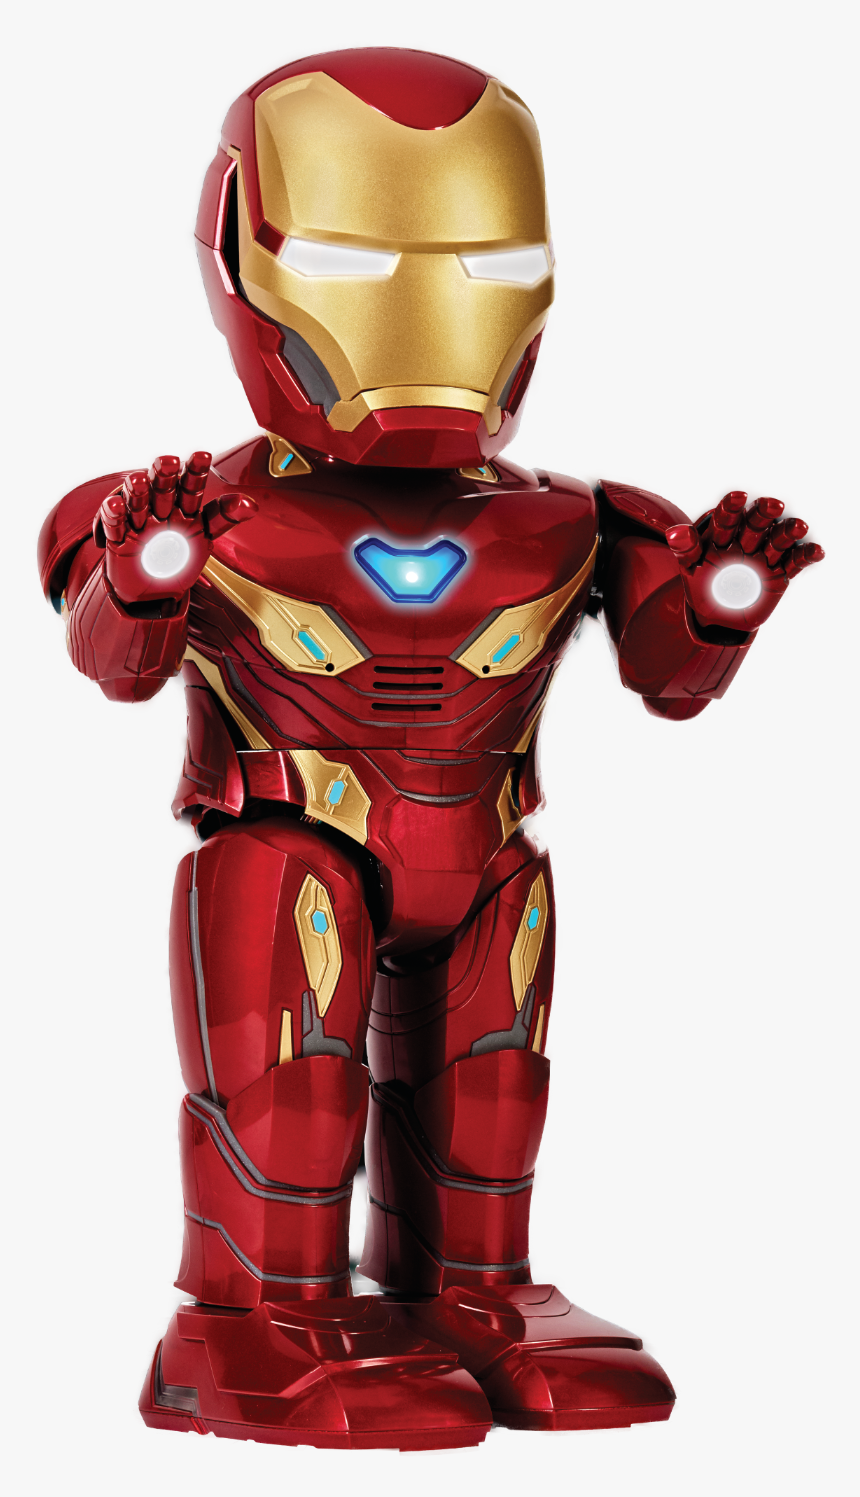 Using The Advanced App To Record A Video Of Yourself - Ubtech Iron Man Mk50 Robot